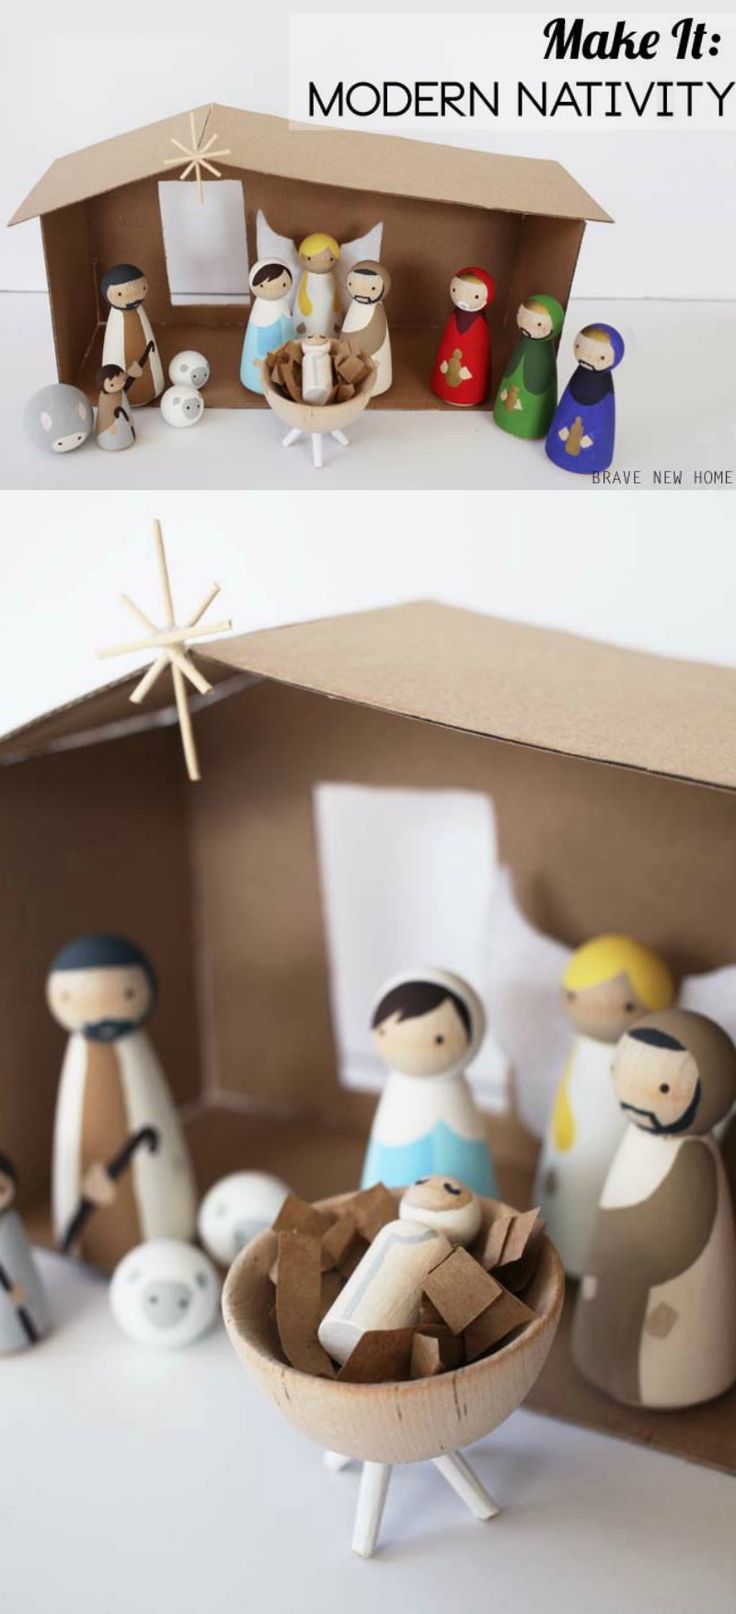 Wooden DIY Nativity Set for a Modern Holiday